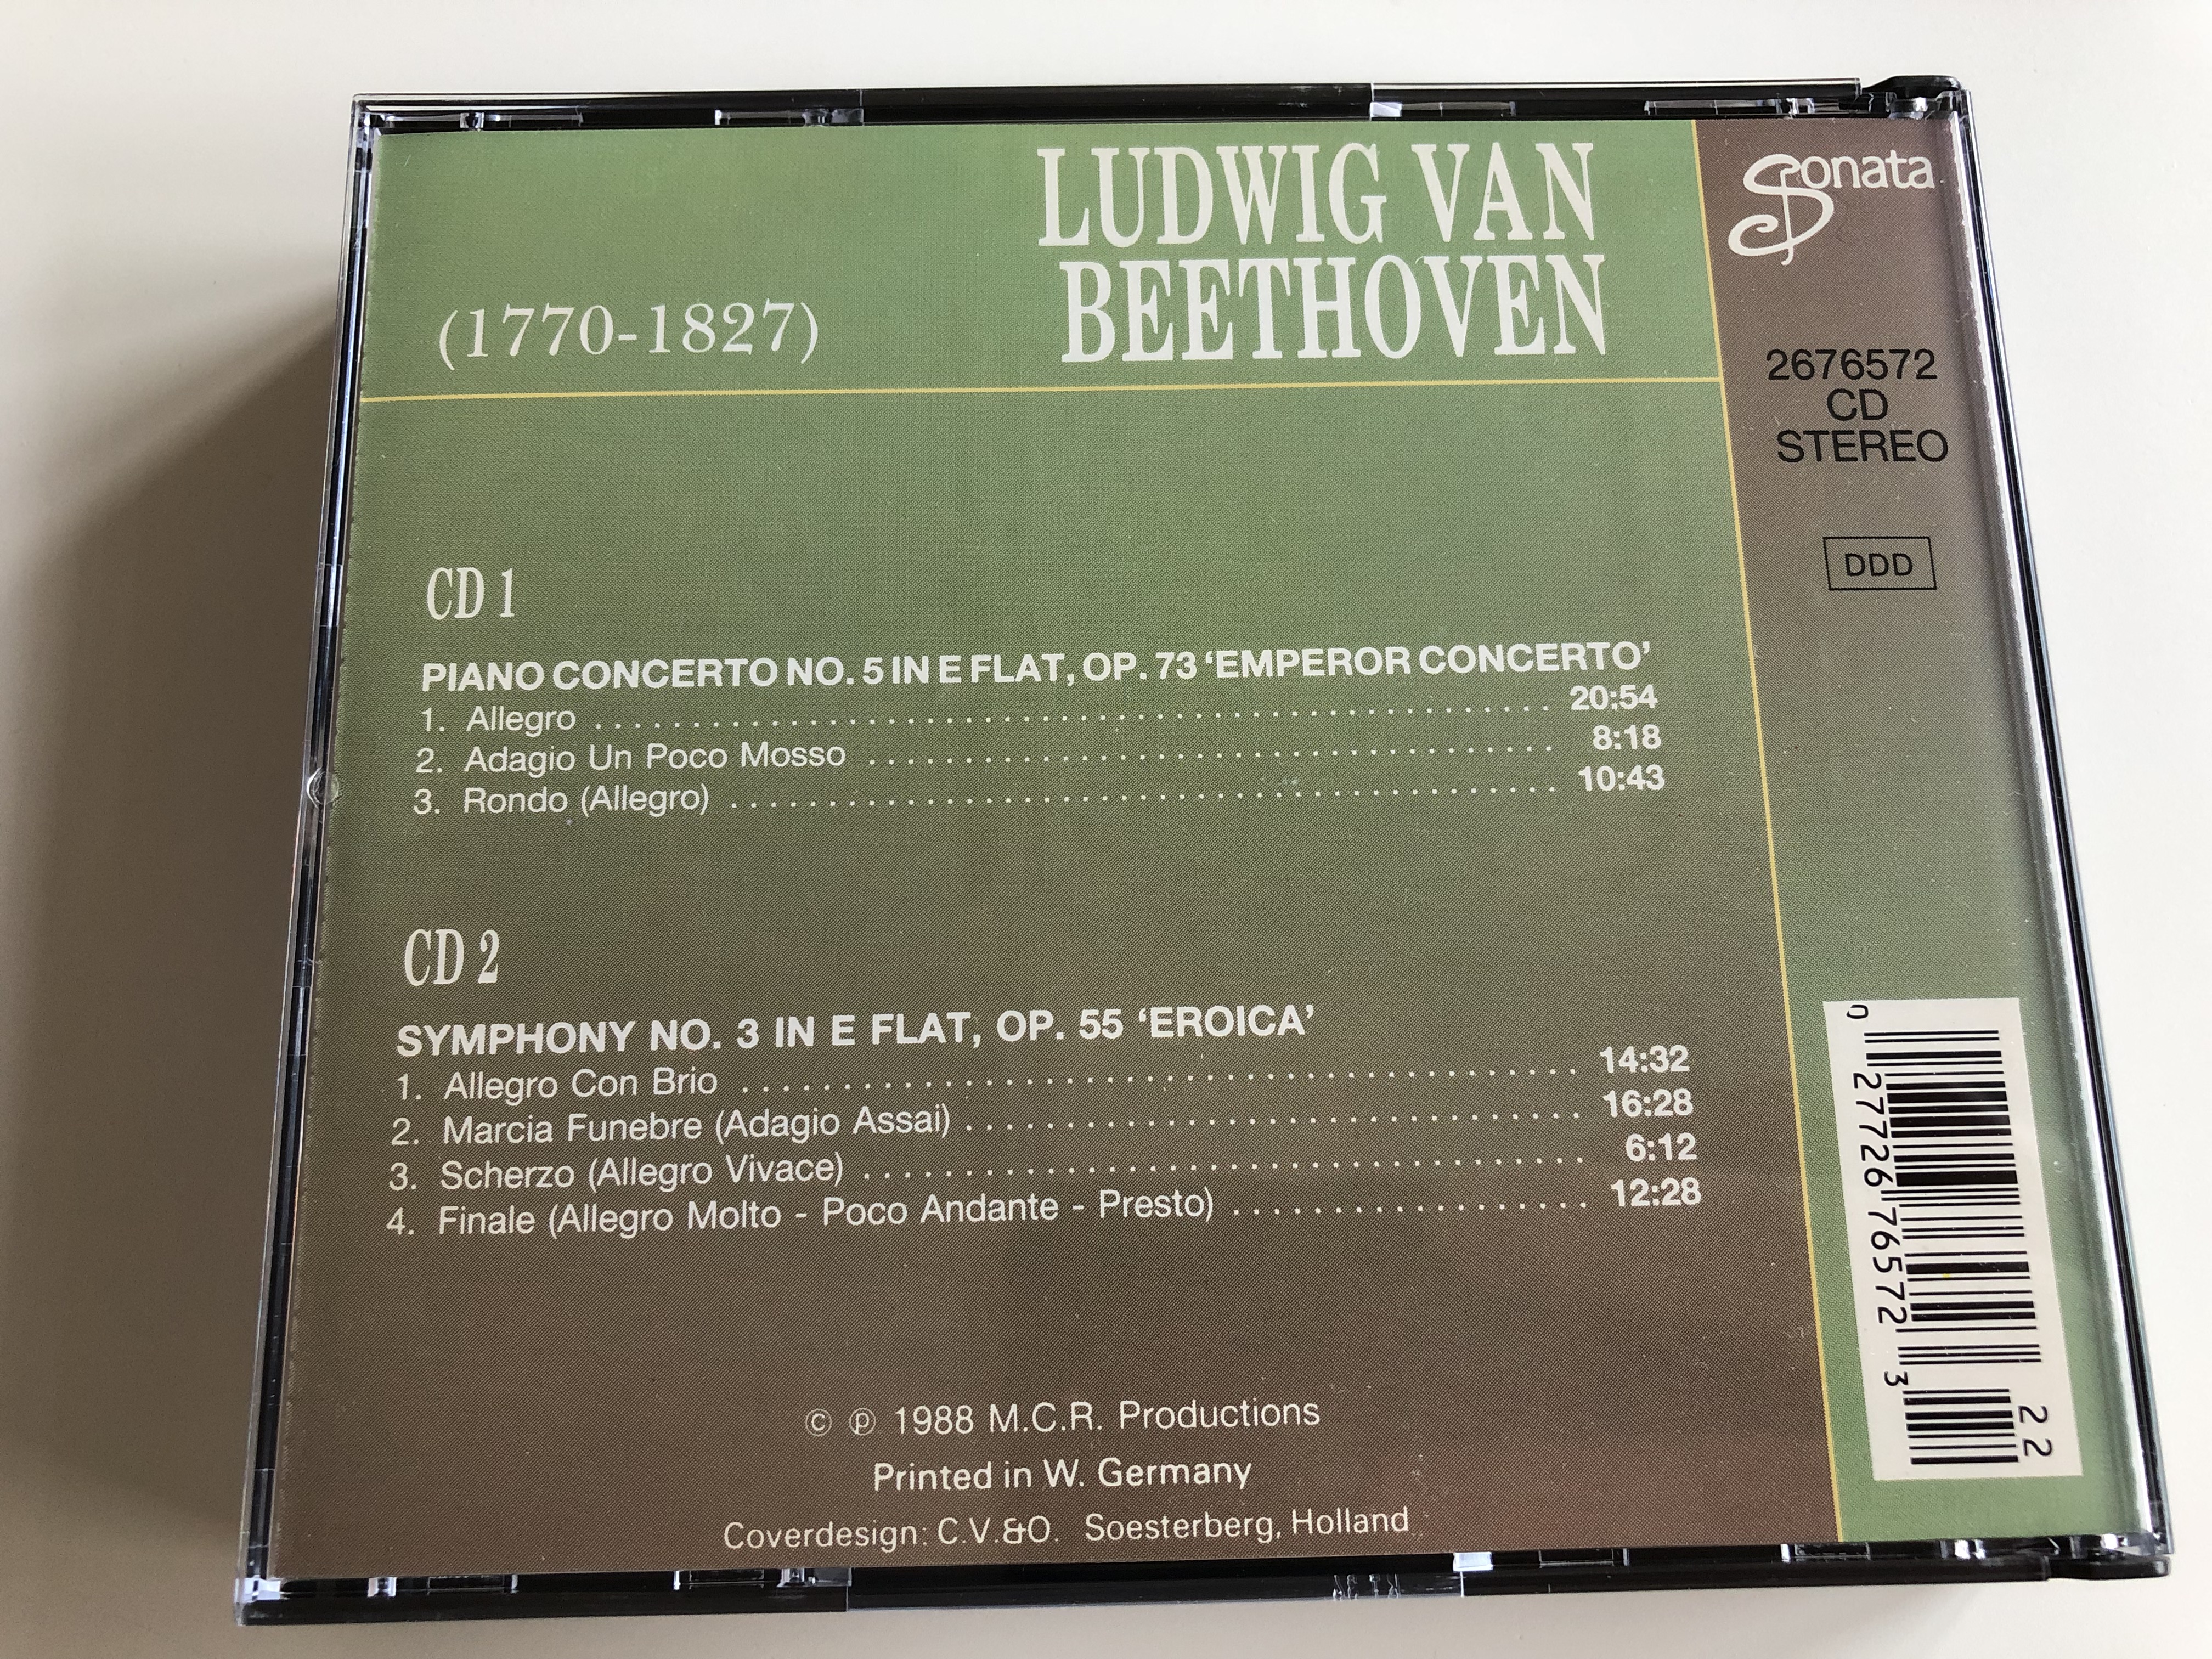 ludwig-van-beethoven-piano-concerto-no.-5-op.-73-emperor-concerto-symphony-no.-3-op.-55-eroica-slovak-philharmonic-orchestra-conducted-by-zdenek-ko-ler-2-cd-more-than-90-minutes-of-music-5-.jpg